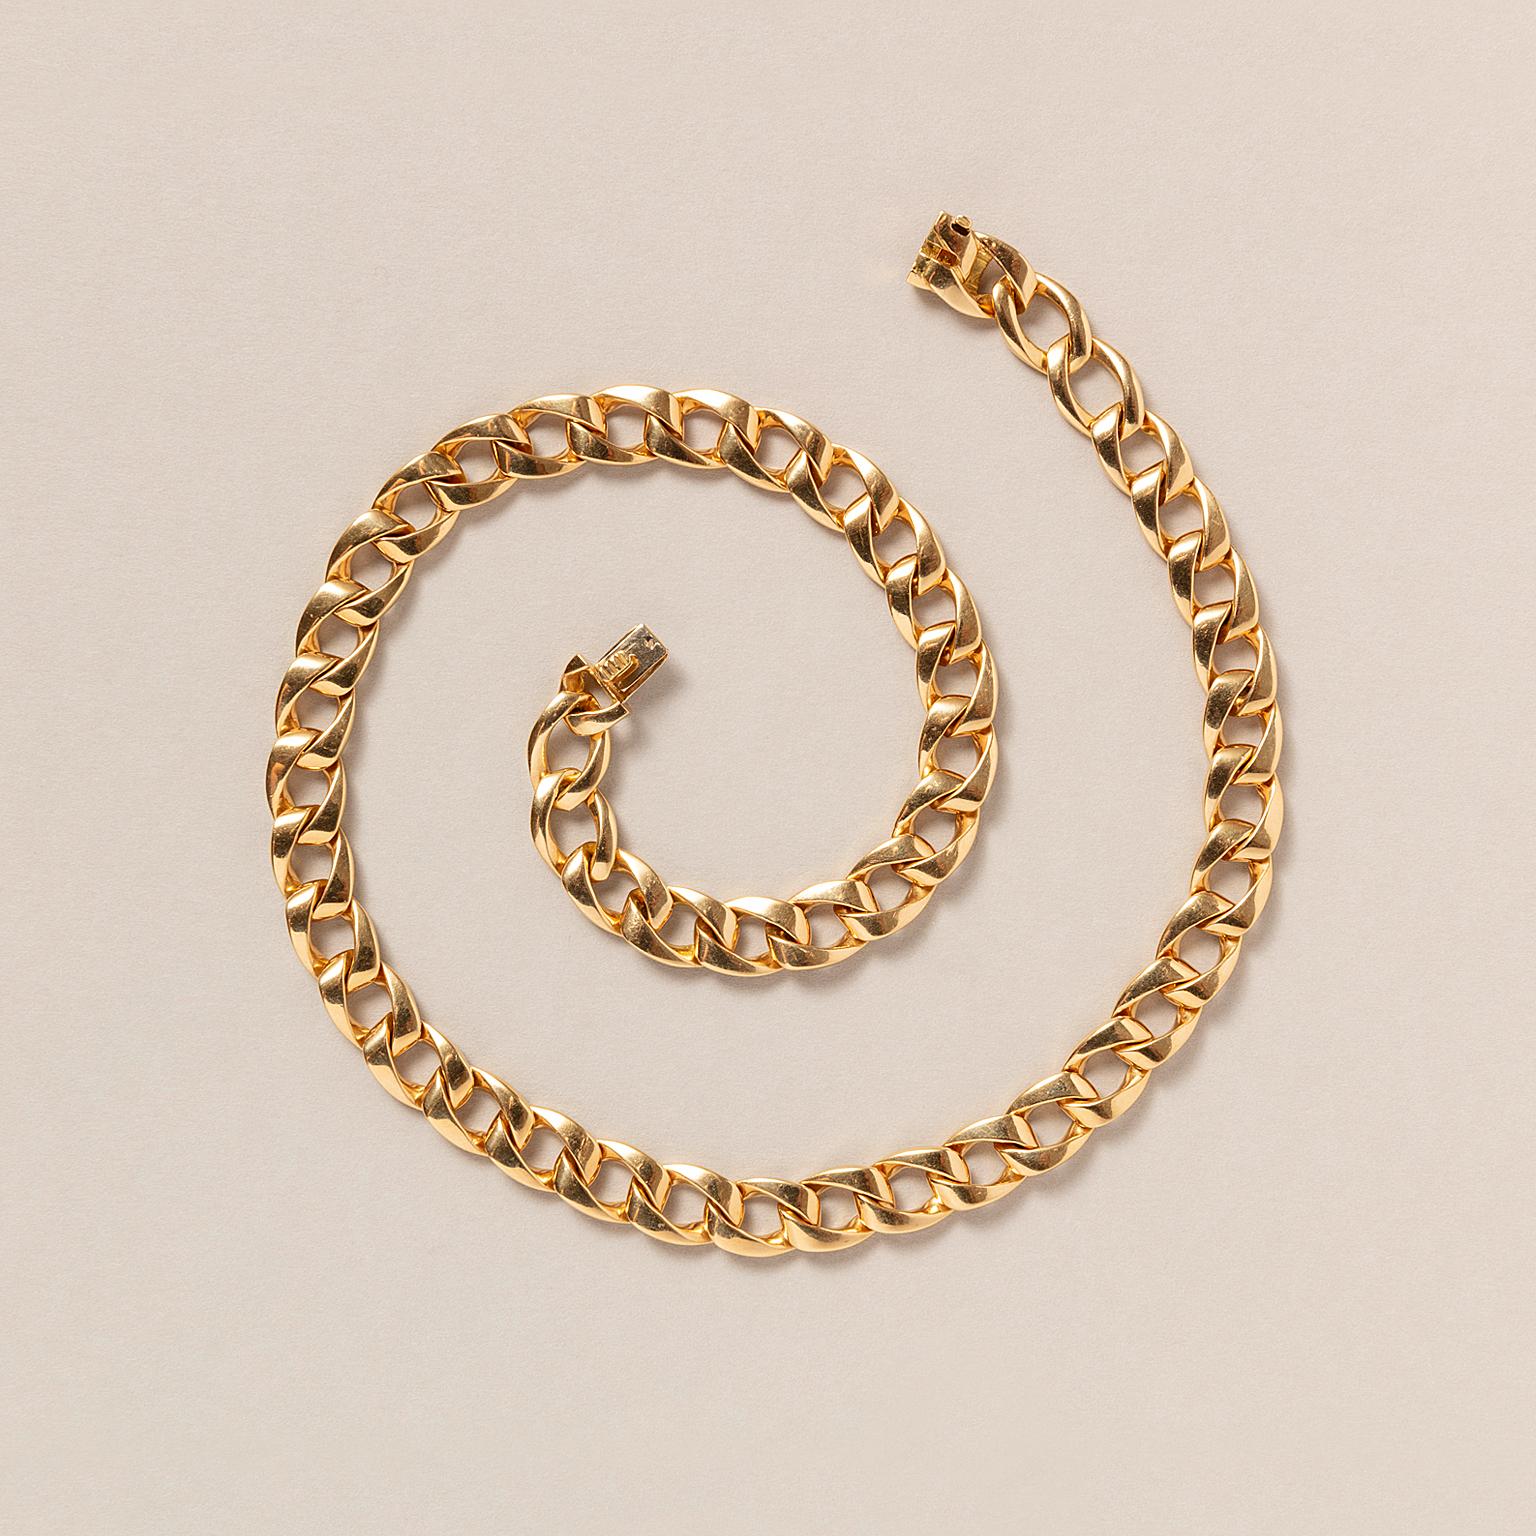 An 18 carat golden soft rounded curb link necklace, signed and numbered: Cartier, 606605, French assay marks and master mark, model Bargame, 1988.

weight: 93.3 grams
dimensions: 44.5 x 0.9 cm